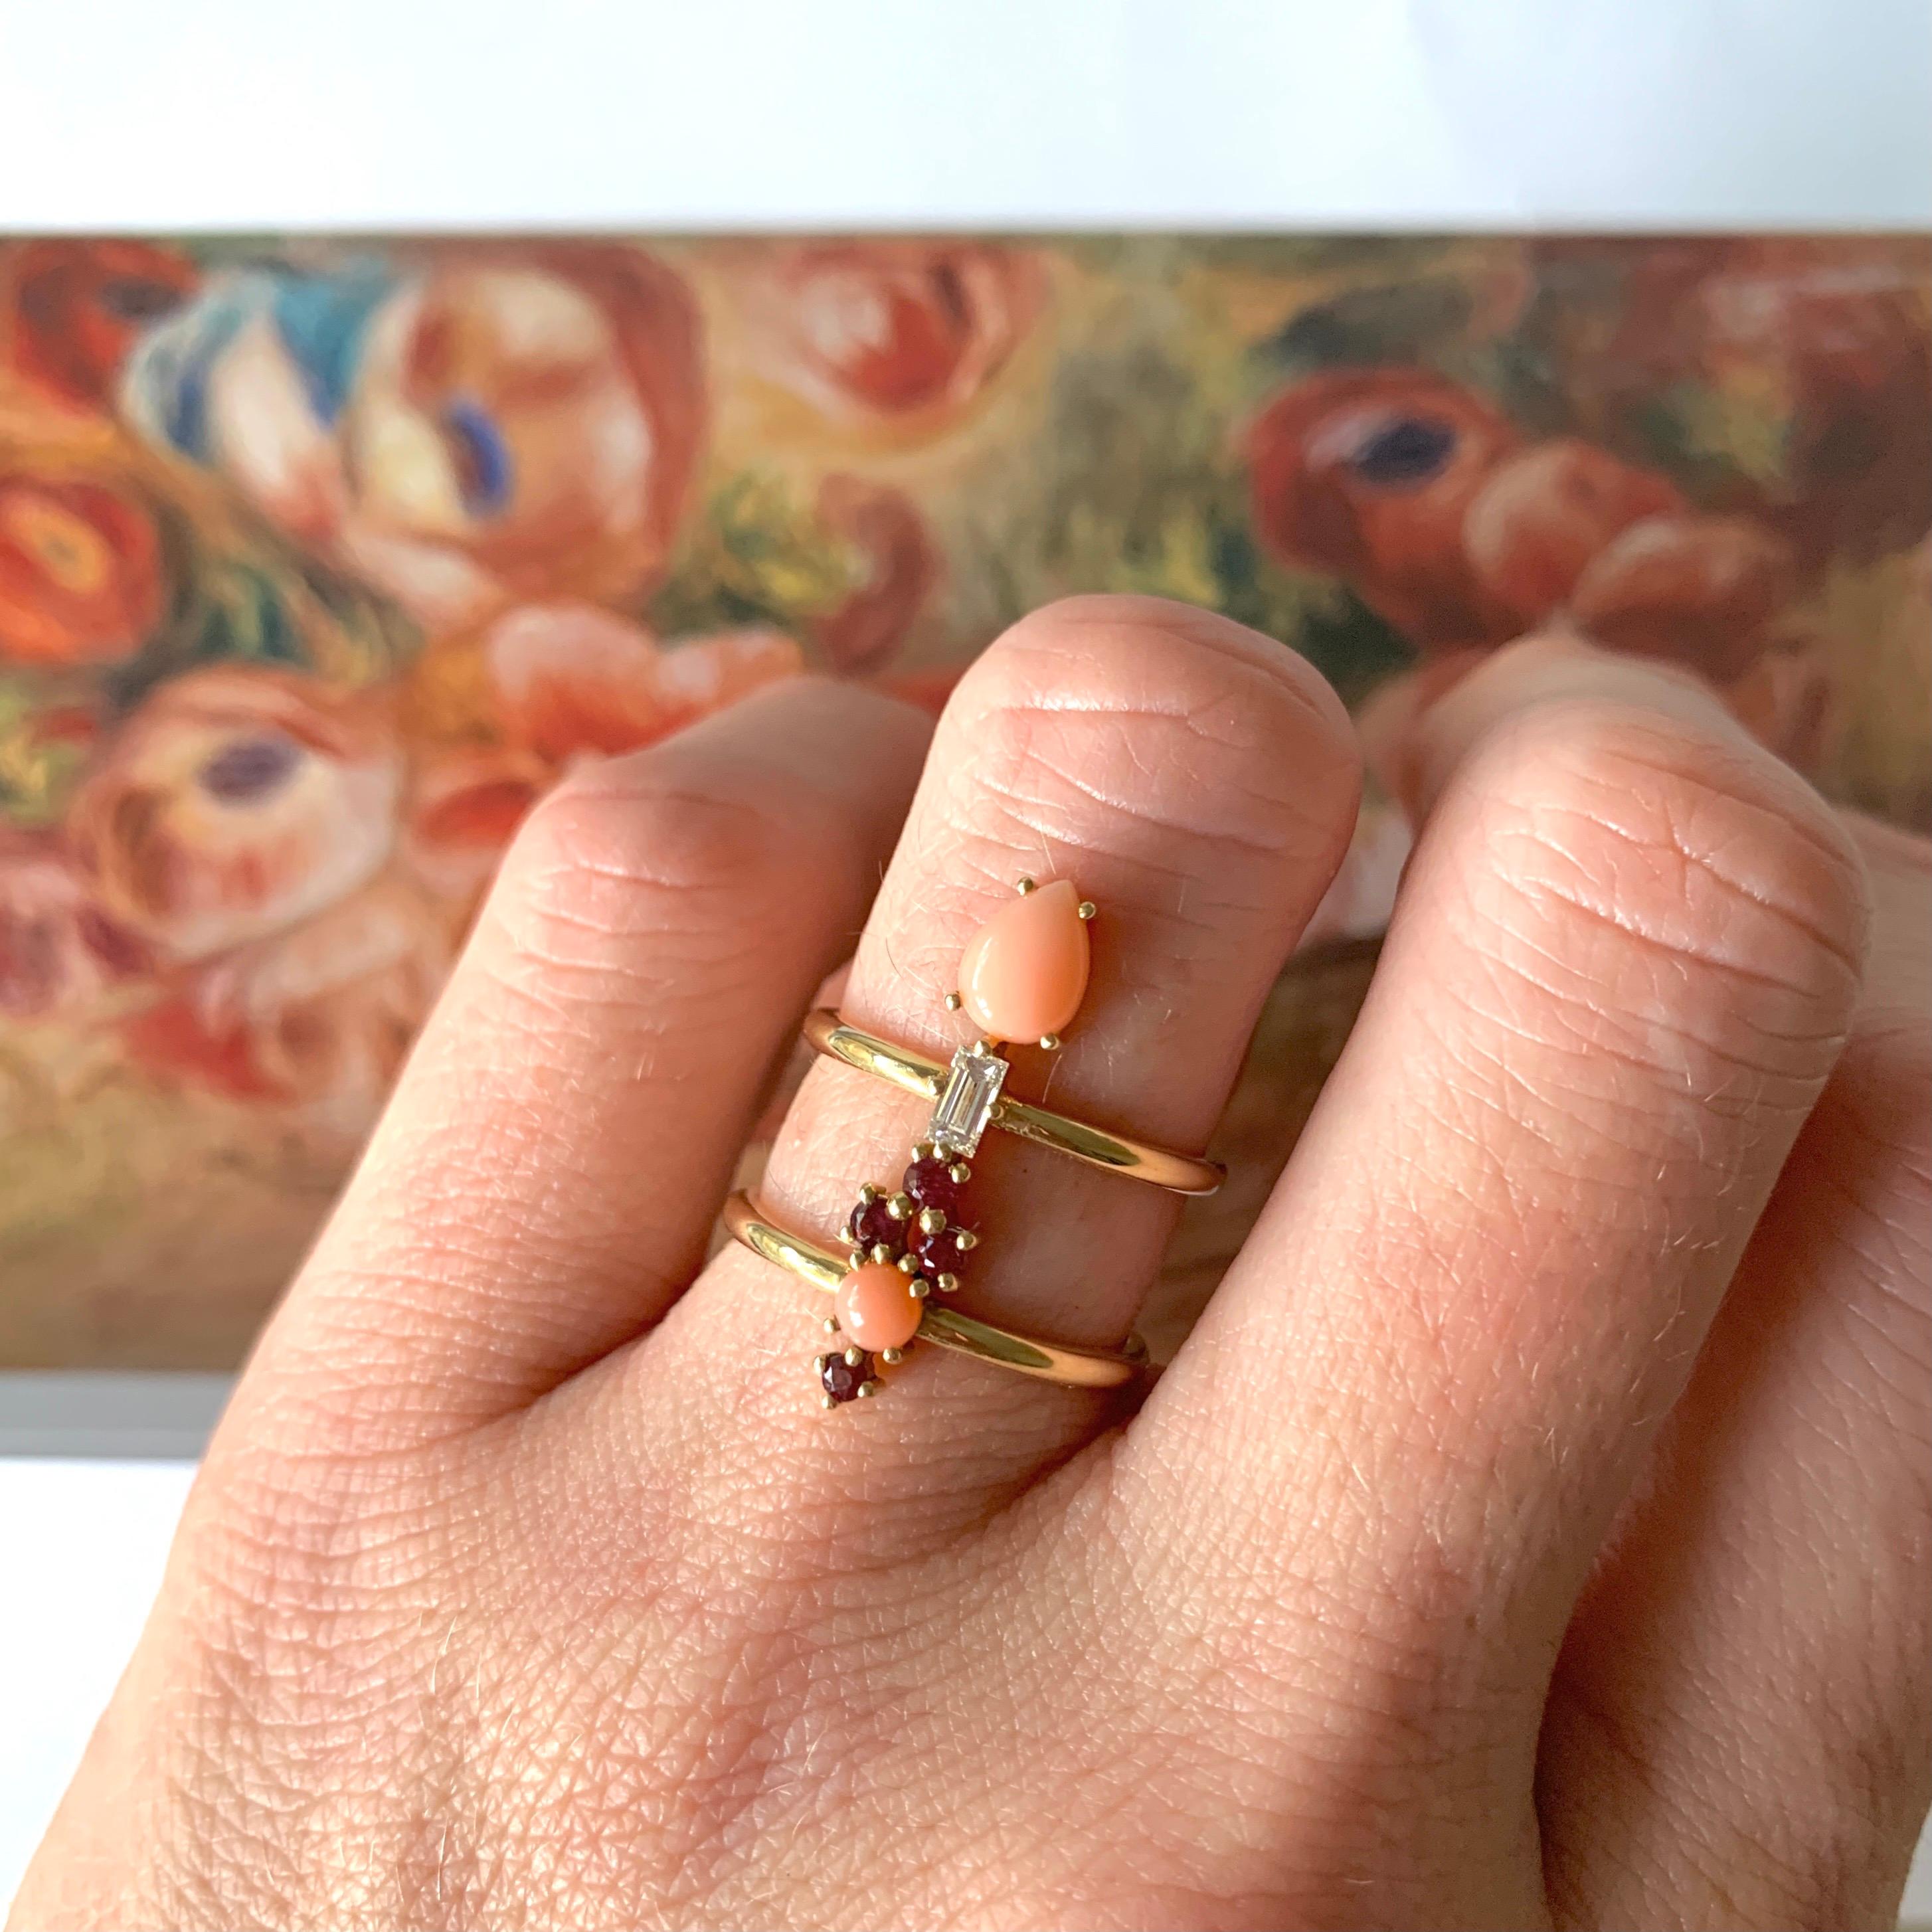 Women's Colorful 18 Karat Gold Ring with Spinels, Corals and a Baguette Diamond